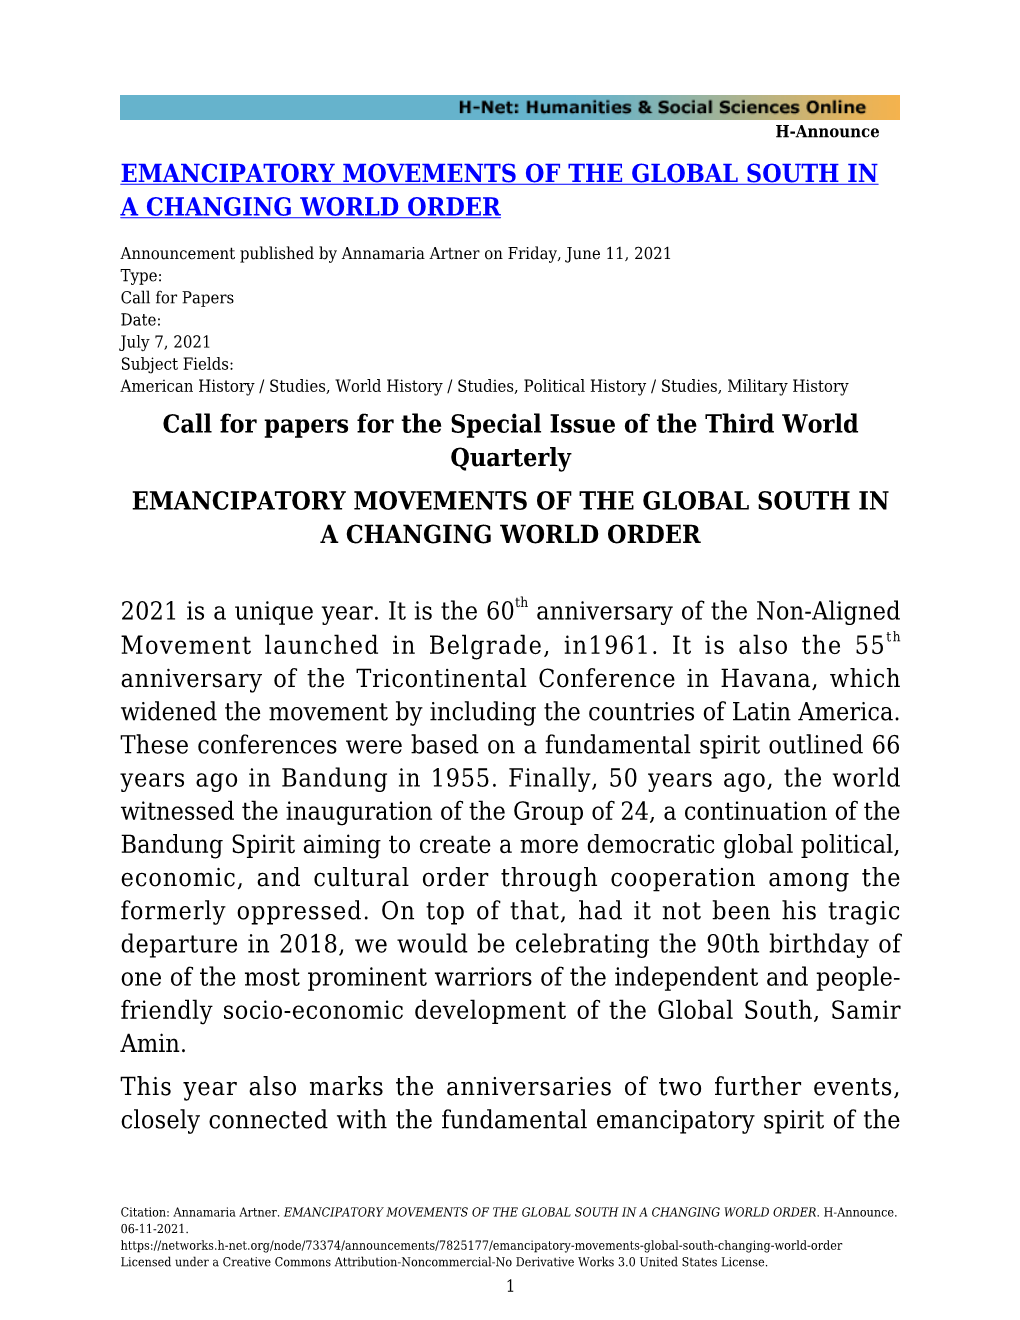 Emancipatory Movements of the Global South in a Changing World Order